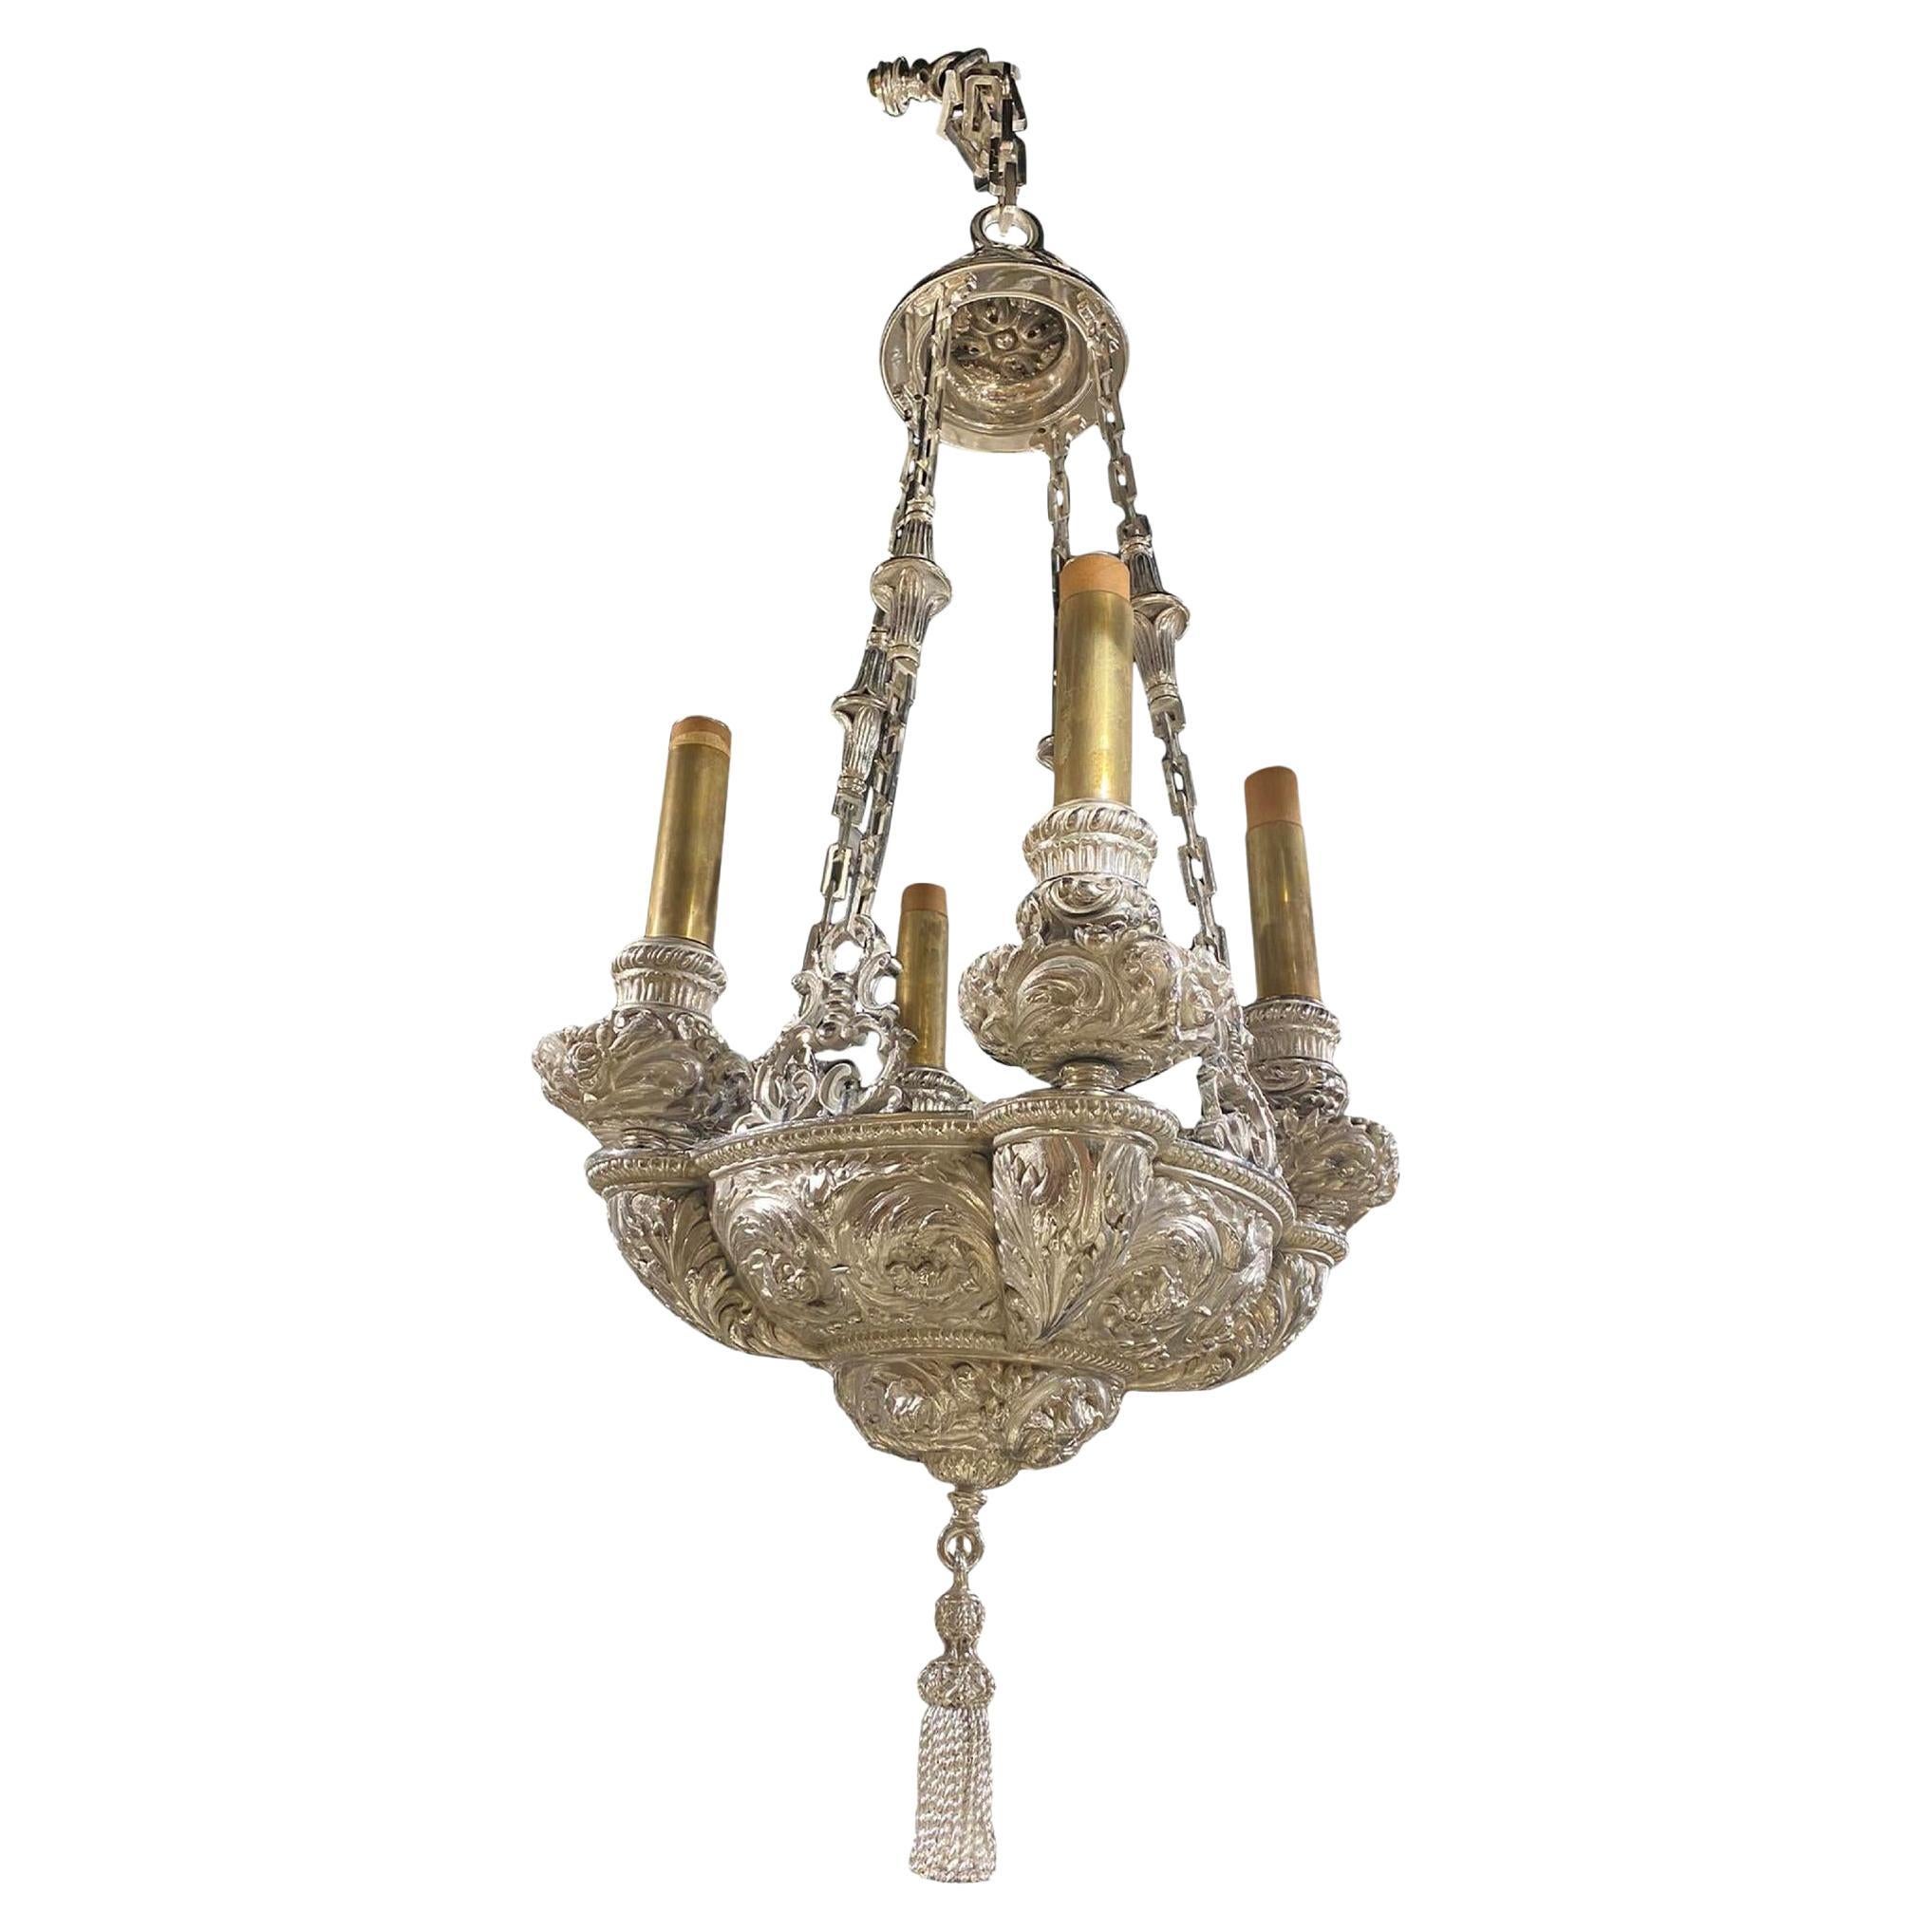 Caldwell Silver Plated Chandelier, Circa 1900